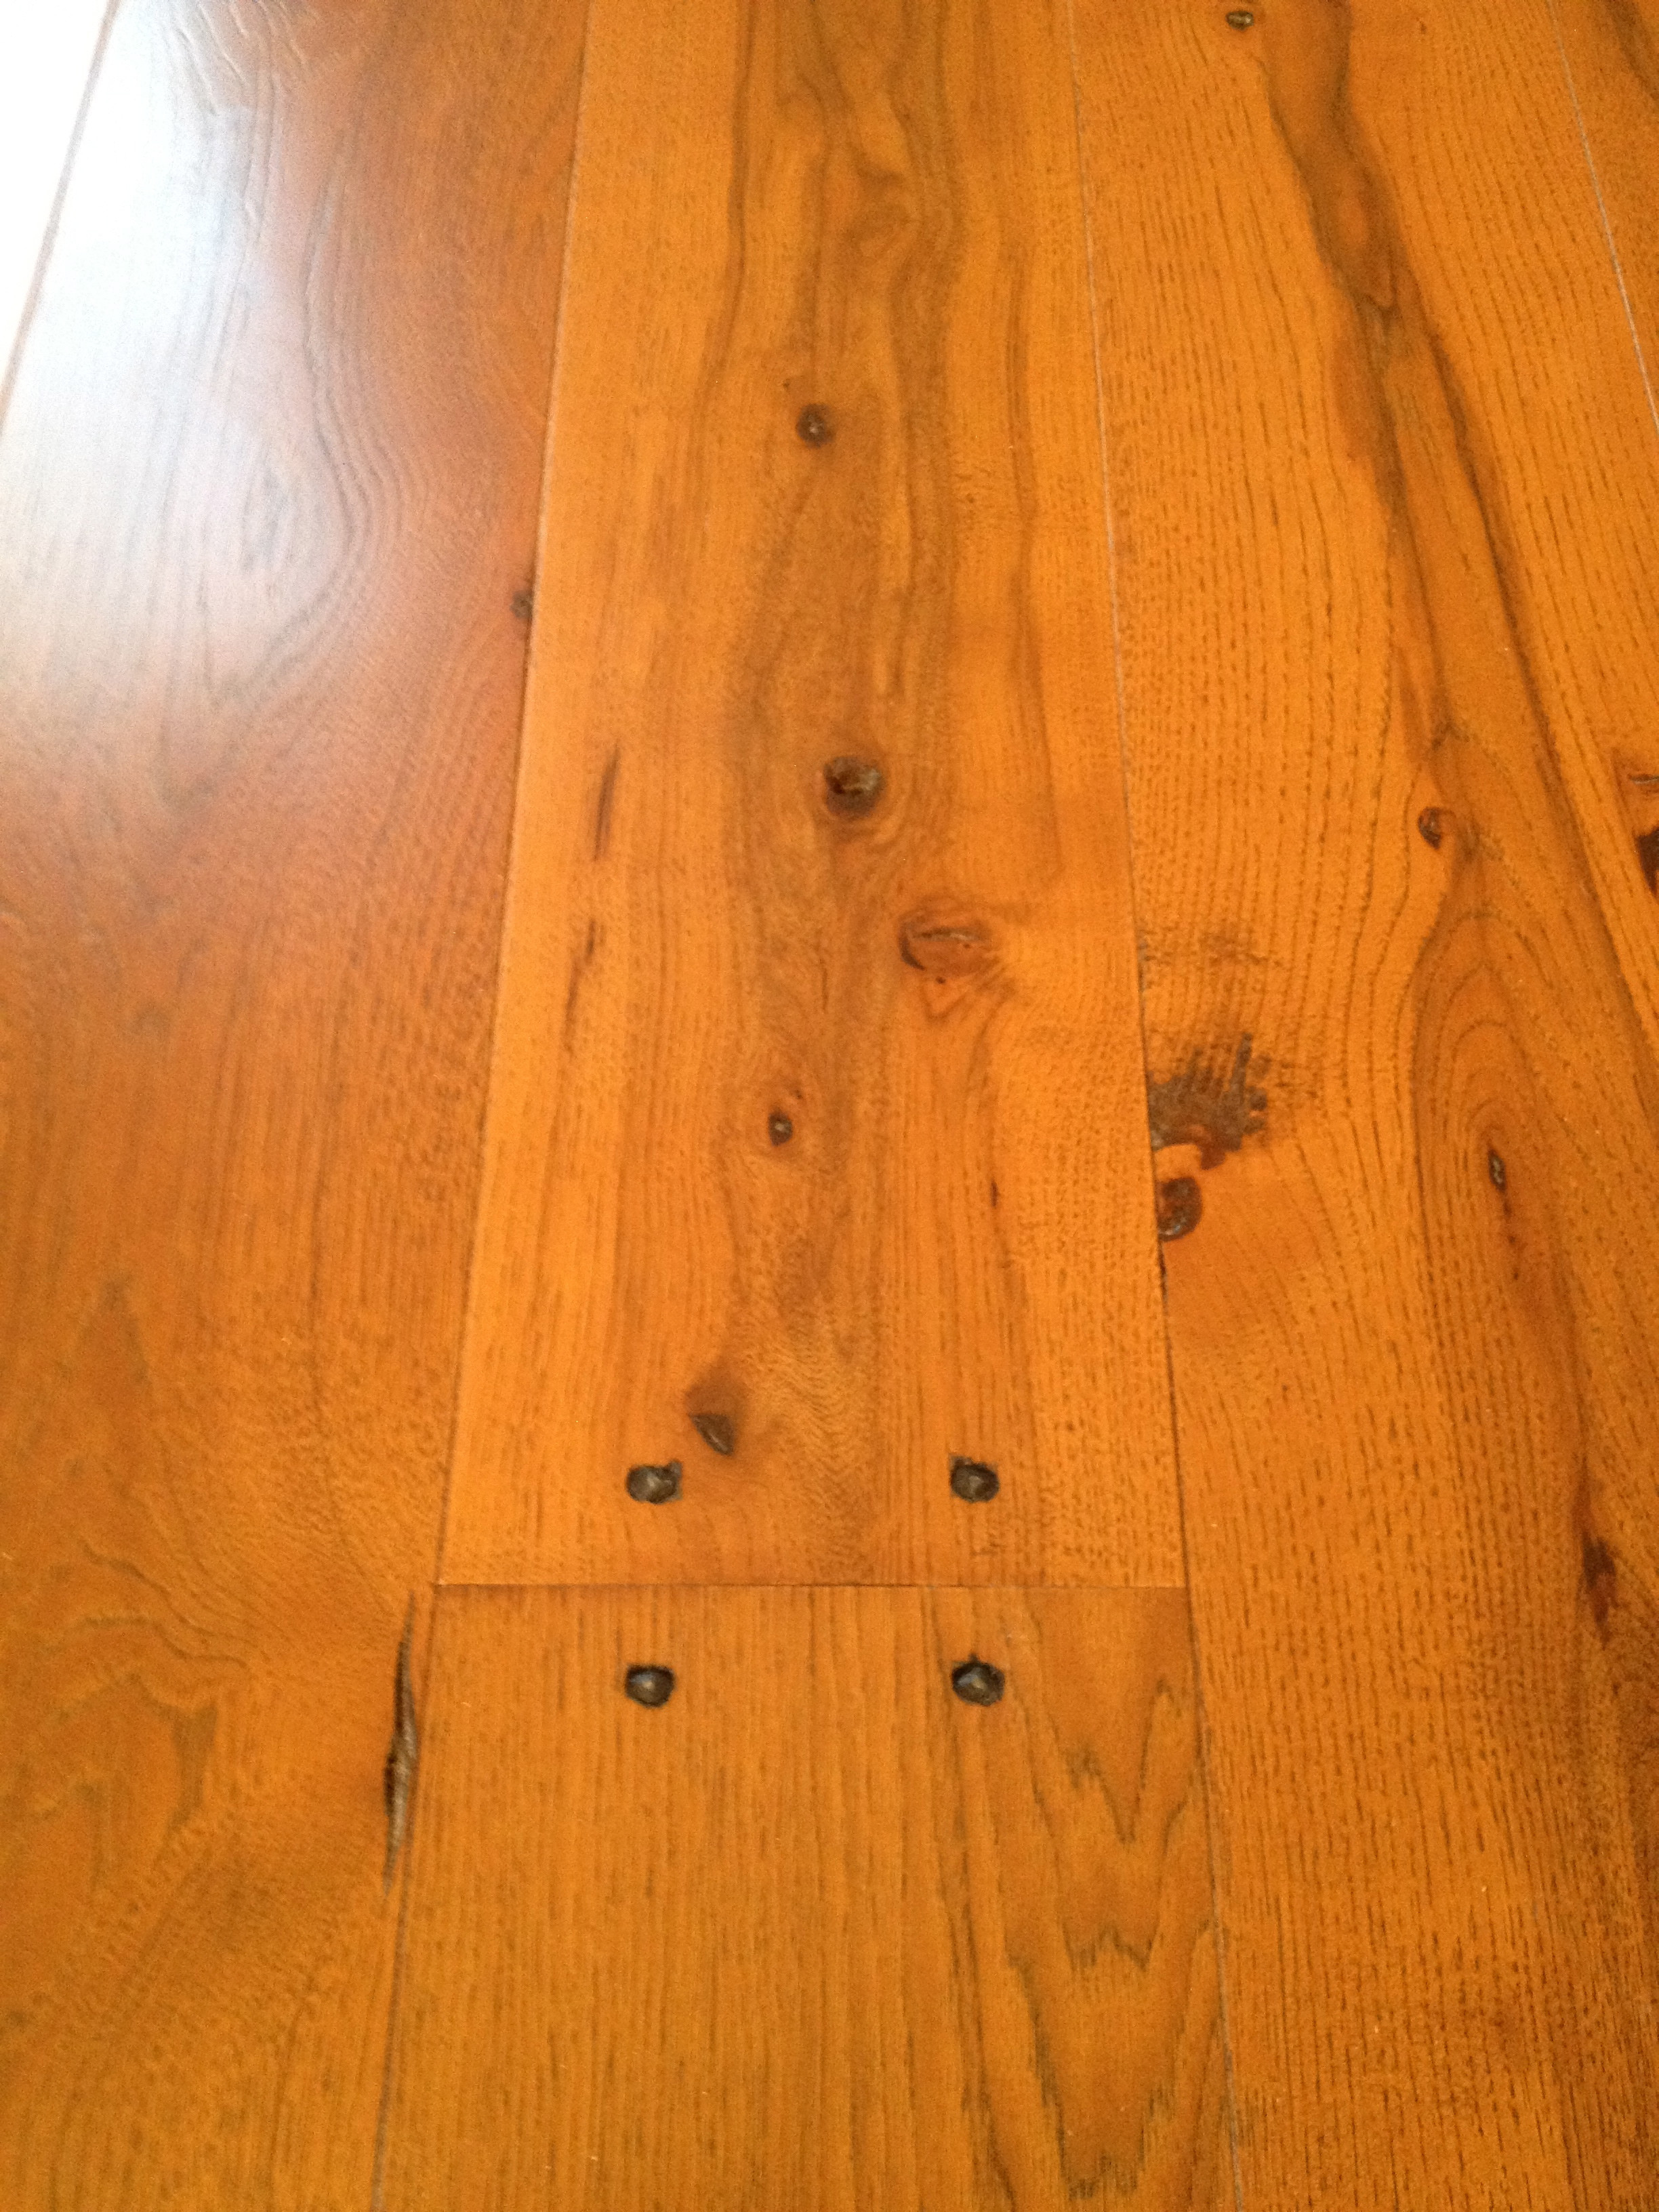 13 attractive Hardwood Floor Refinishing south Jersey 2022 free download hardwood floor refinishing south jersey of flooring portfolio gorsegner brothers throughout img 0322